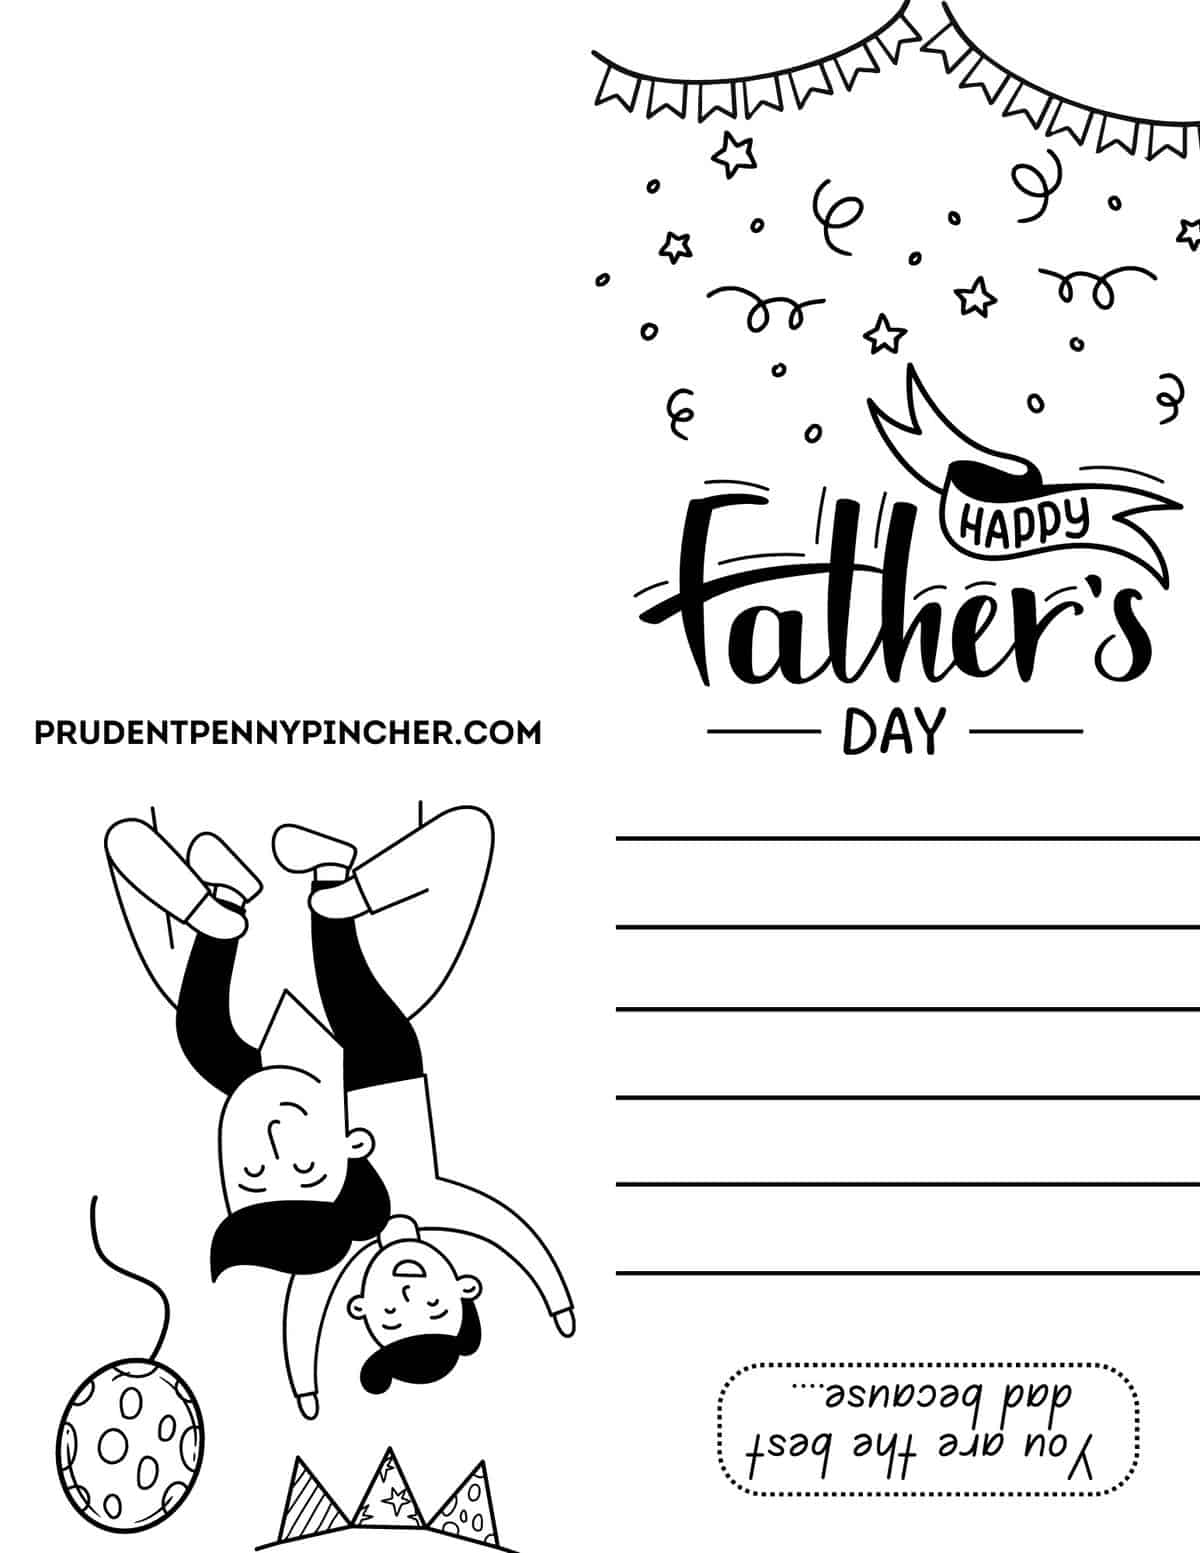 happy Father's Day coloring page card for kids